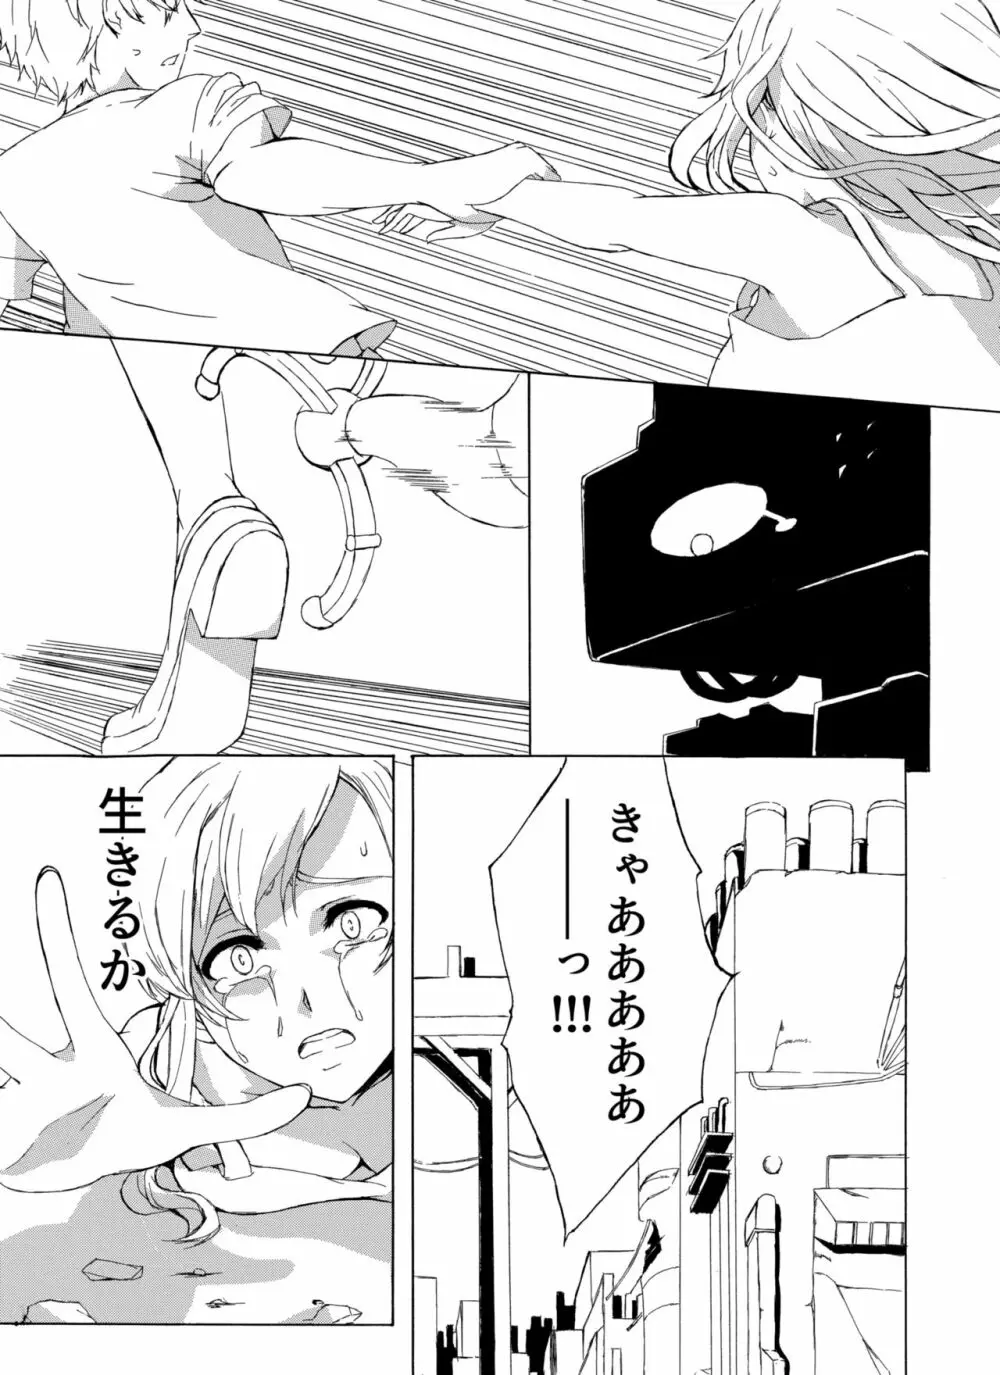 Alive or Explosion 第一話 「序章」 Page.2